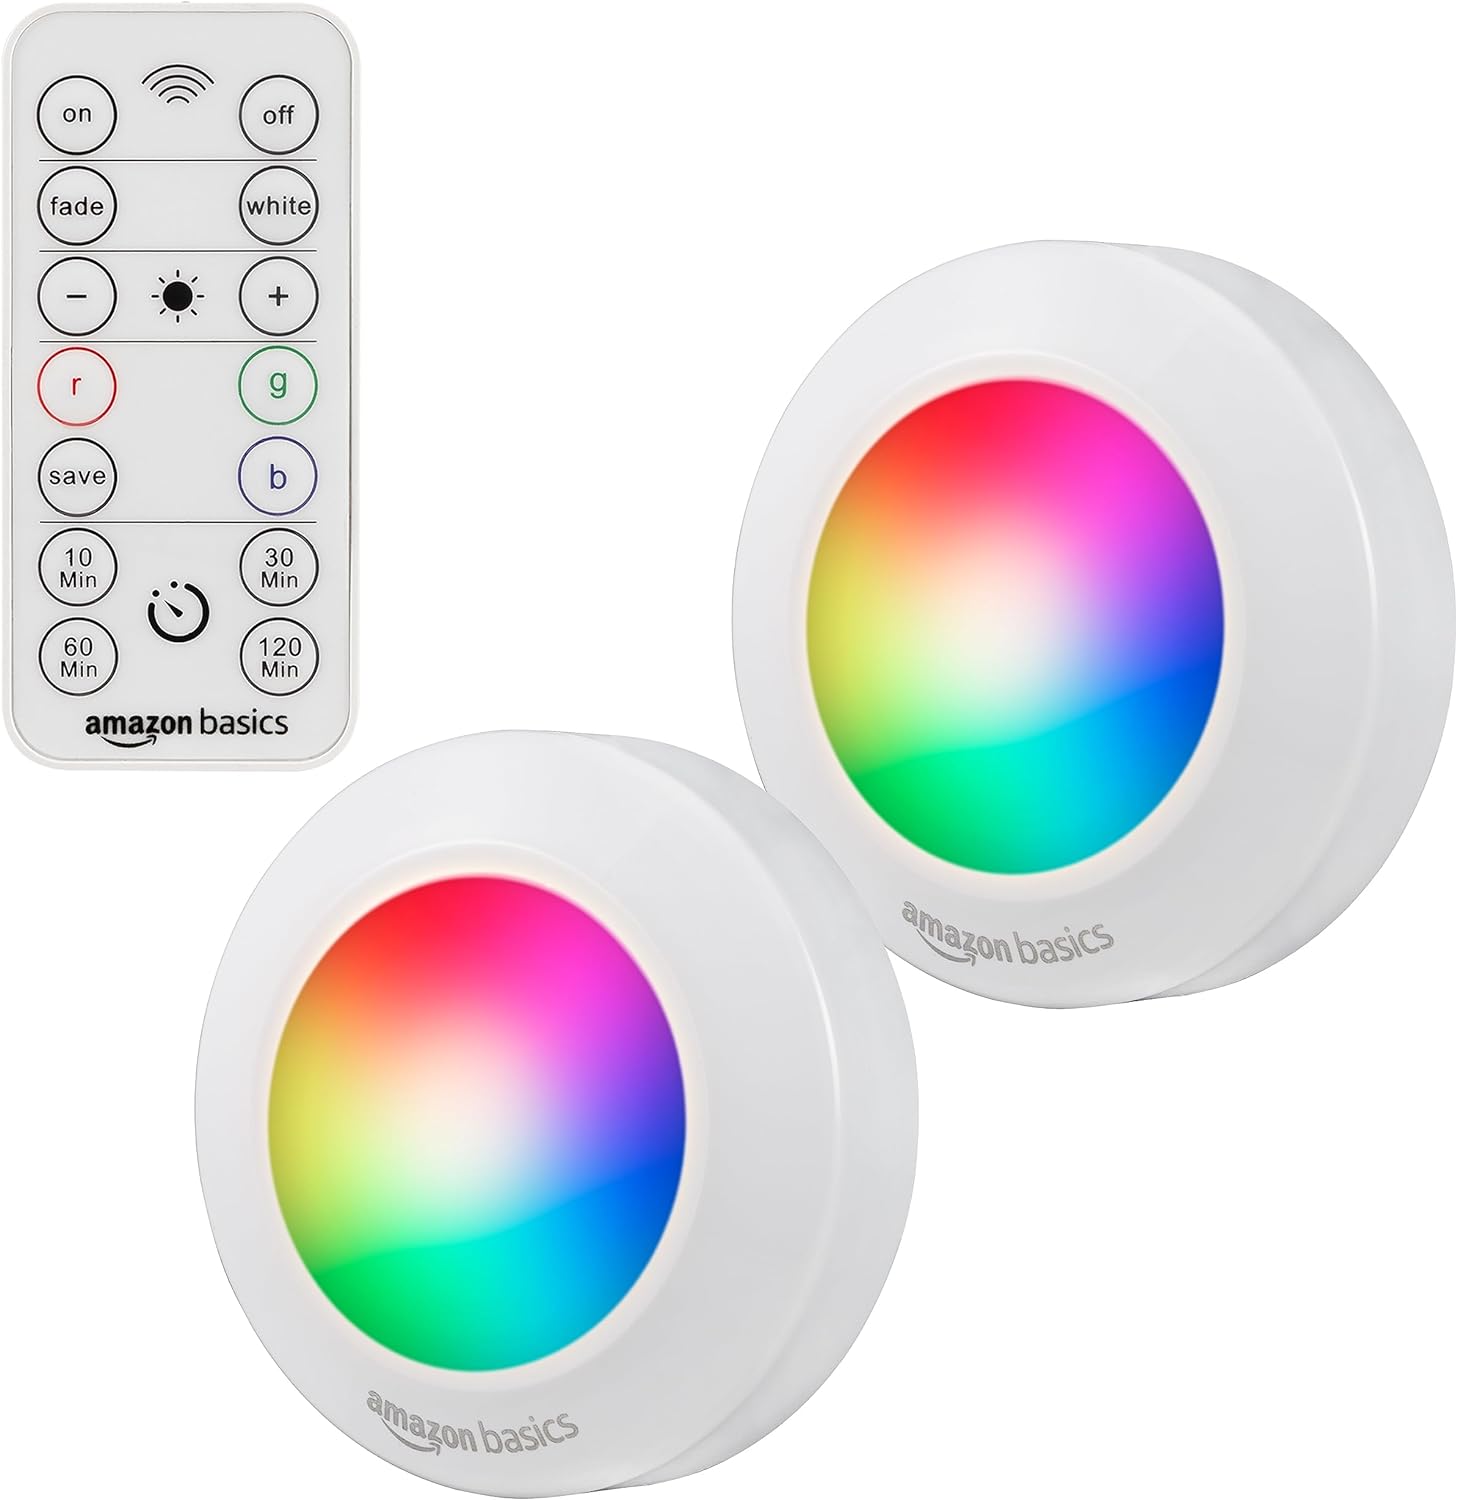 Amazon Basics LED Puck Lights, Color Changing, Battery Operated, IR Remote, 40 Lumens, 2 Pack, Wireless Lights, Stick on Lights, Under Cabinet Lighting, Ideal for Closets, and More, White. Color-changing LED puck provides multiple modes, single colors, dimmable white light and timers. Use IR remote from up to 25 feet away to use modes and features; push on the lens to easily turn the puck light on or off. Mount using screws or double-sided tape for installations; (tape is included). Powered by 3 AAA batteries (per light) for long-lasting and wire-free operation (batteries not included). IR Remote powered by CR2032 batteries (included). Product Dimensions: 2.7 x 2.7 x 1 inches (WxHxD)